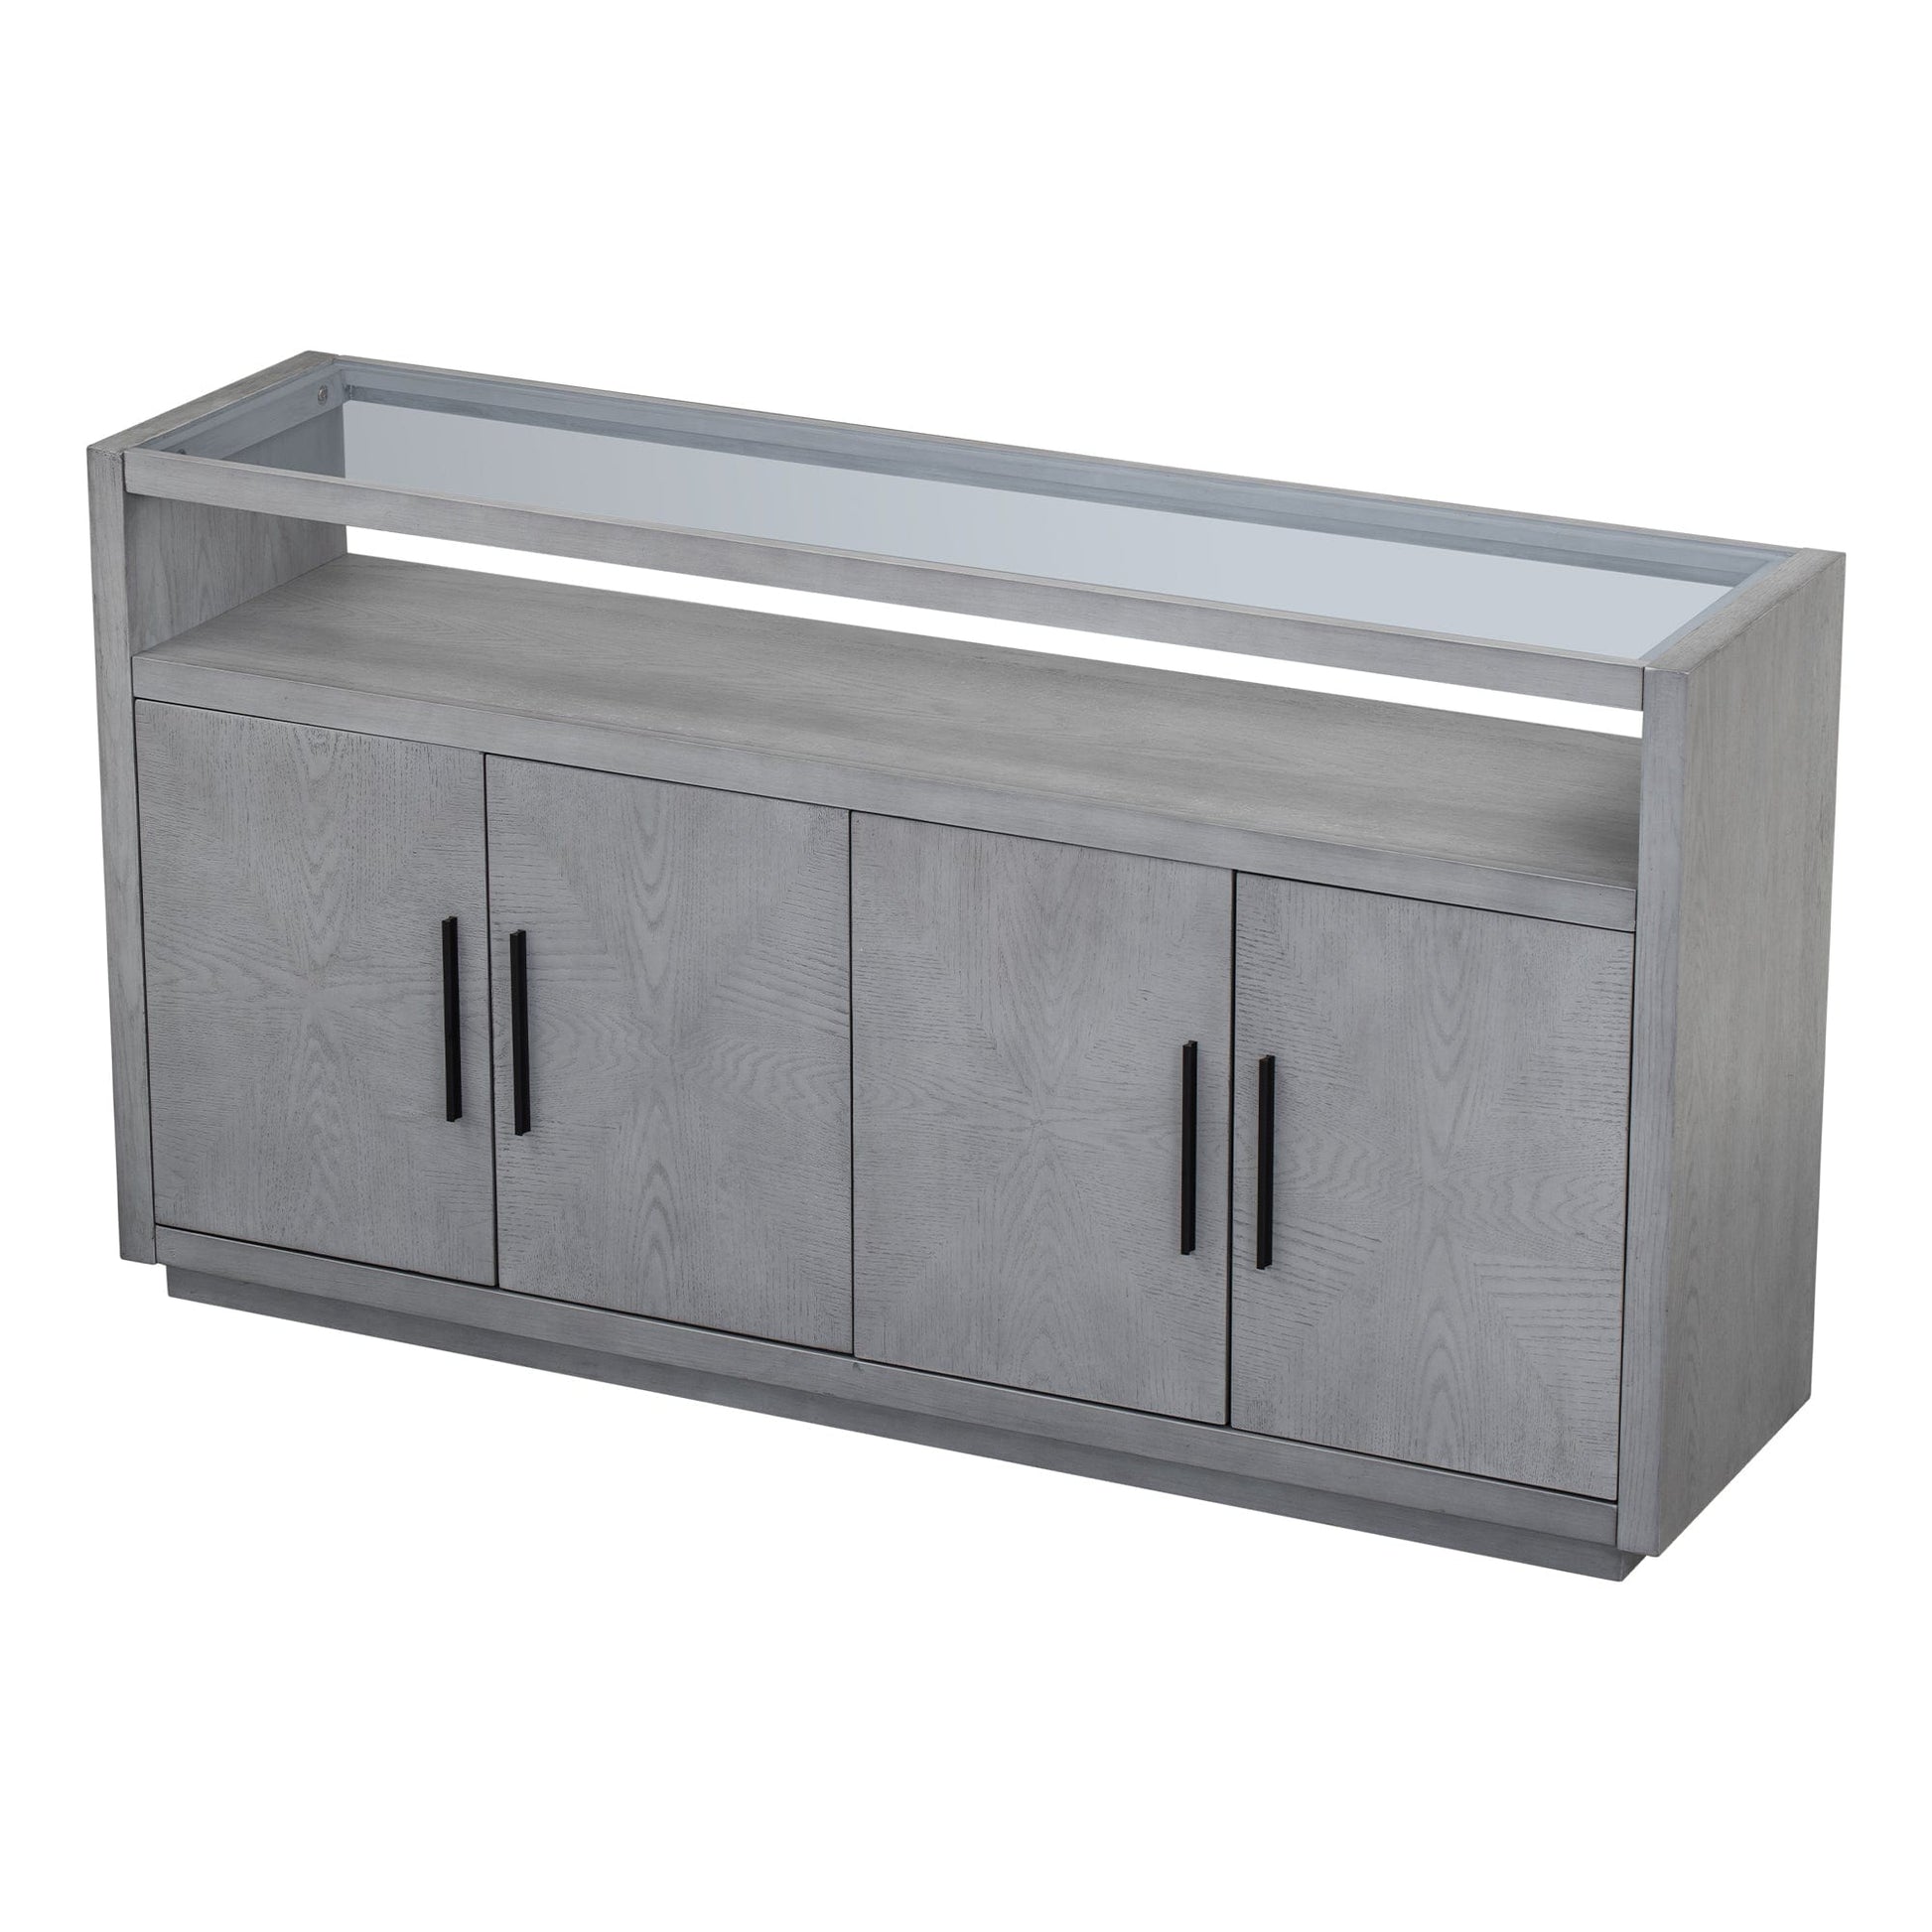 1st Choice Furniture Direct Sideboard 1st Choice Modern Multi-Functional Sideboard Wooden & Metal Cabinet